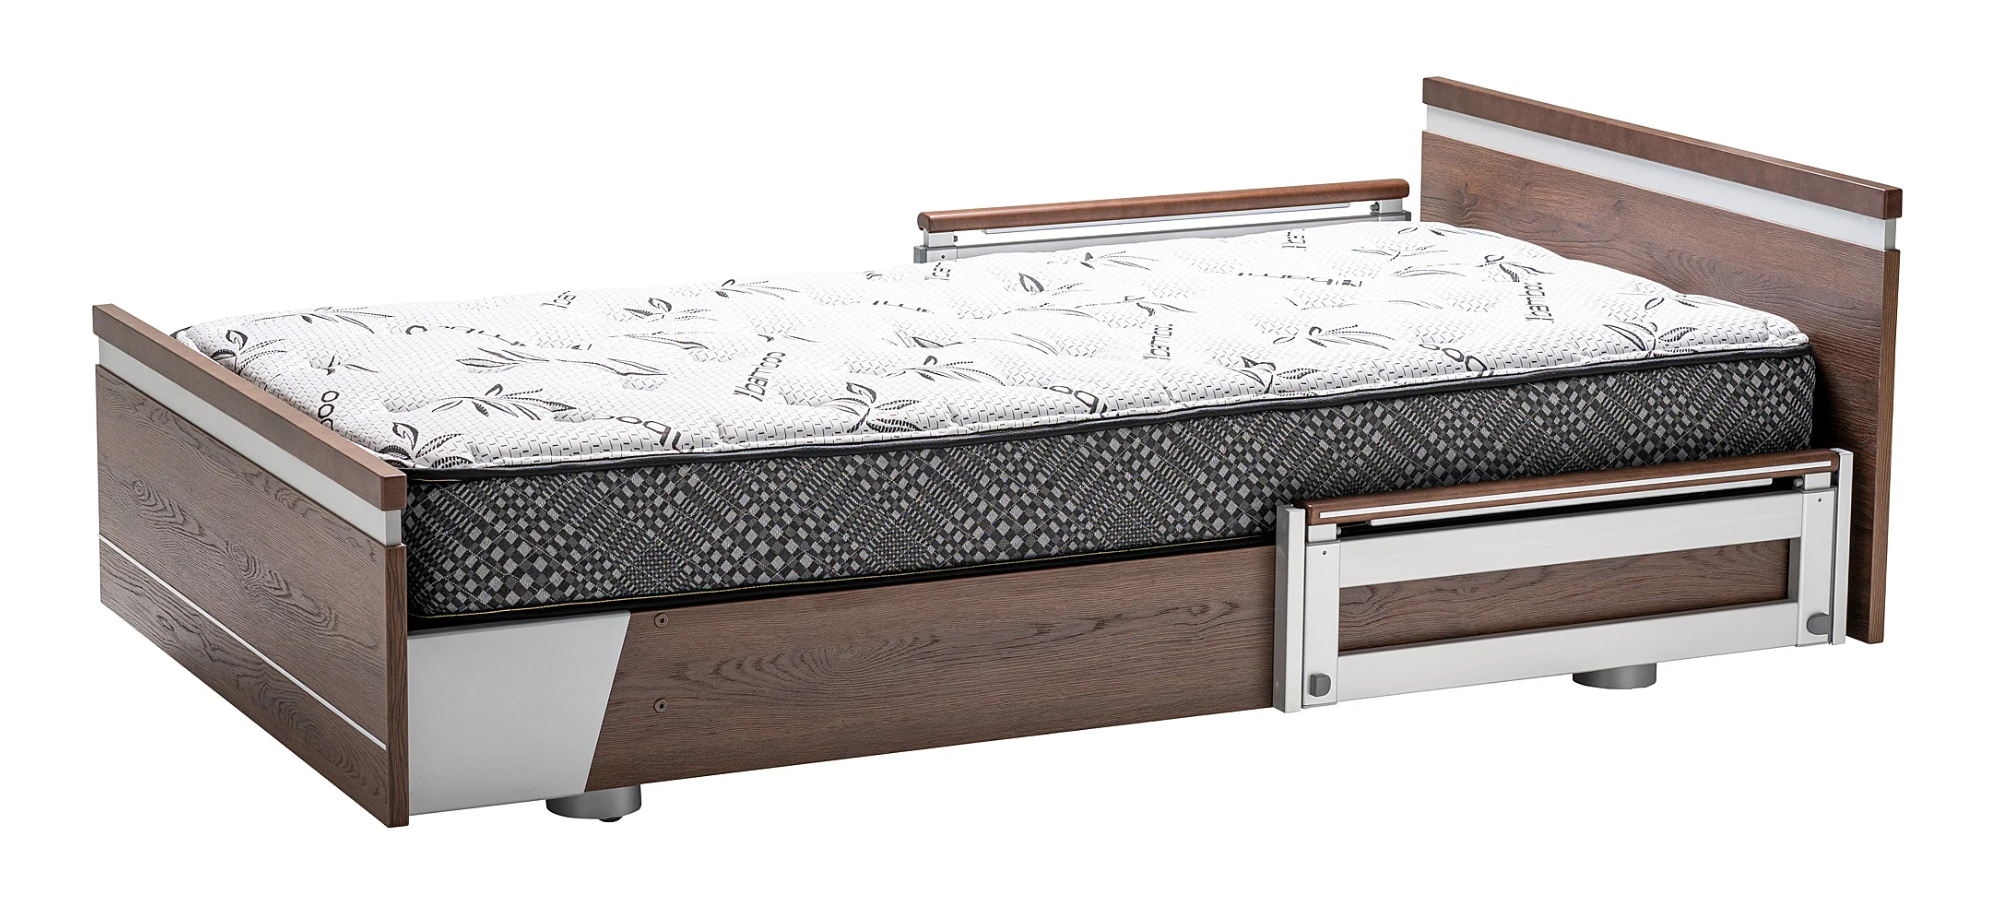 hospital bed New Jersey Home Hospital Beds in New Jersey | Buy Hospital Bed New Jersey